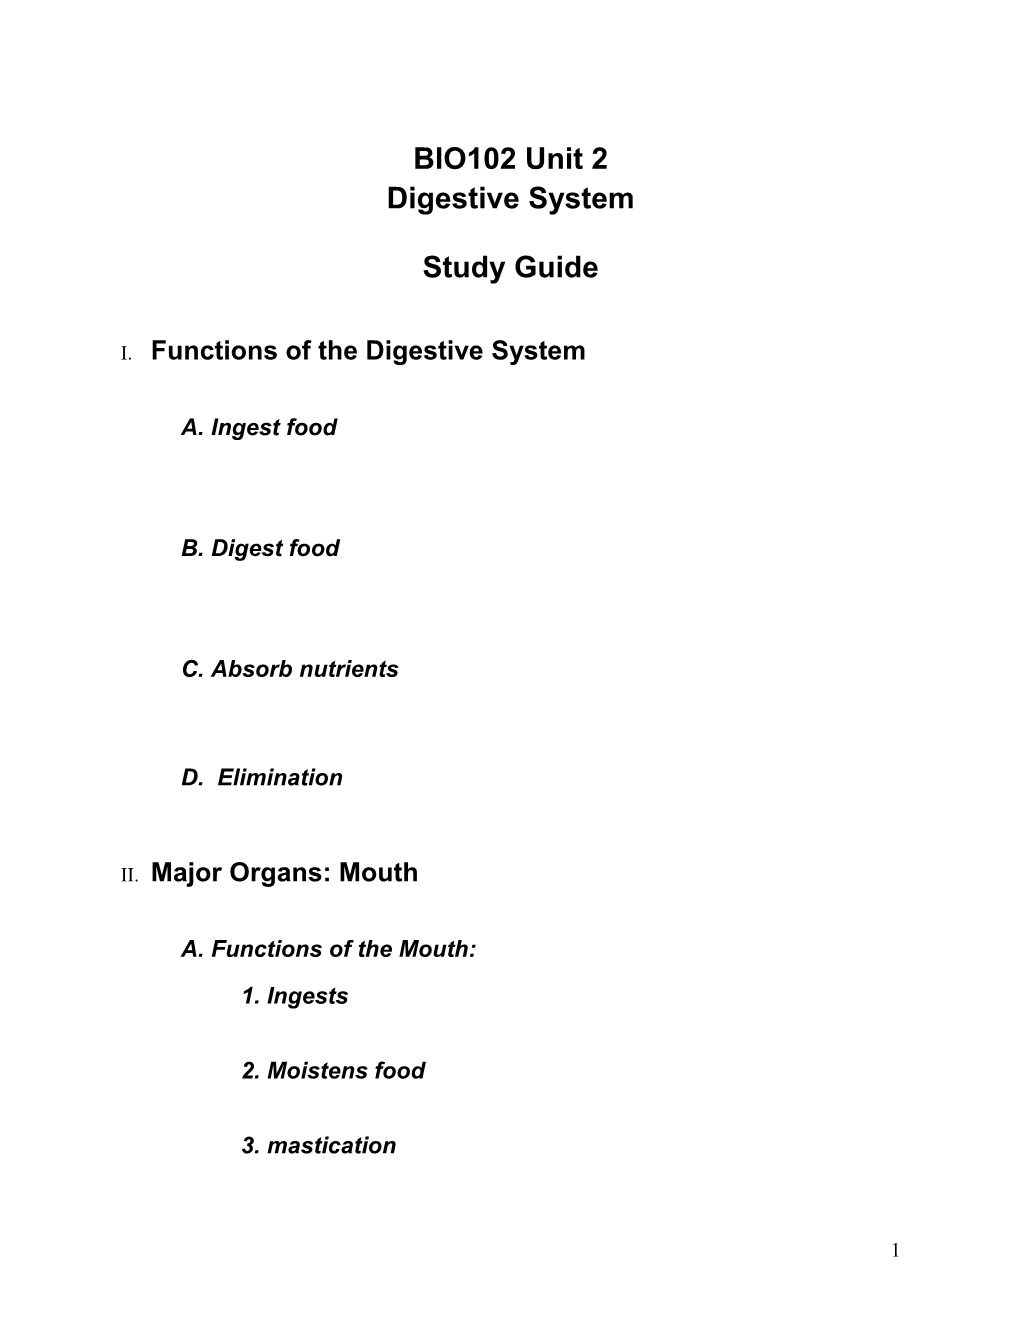 I.Functions of the Digestive System